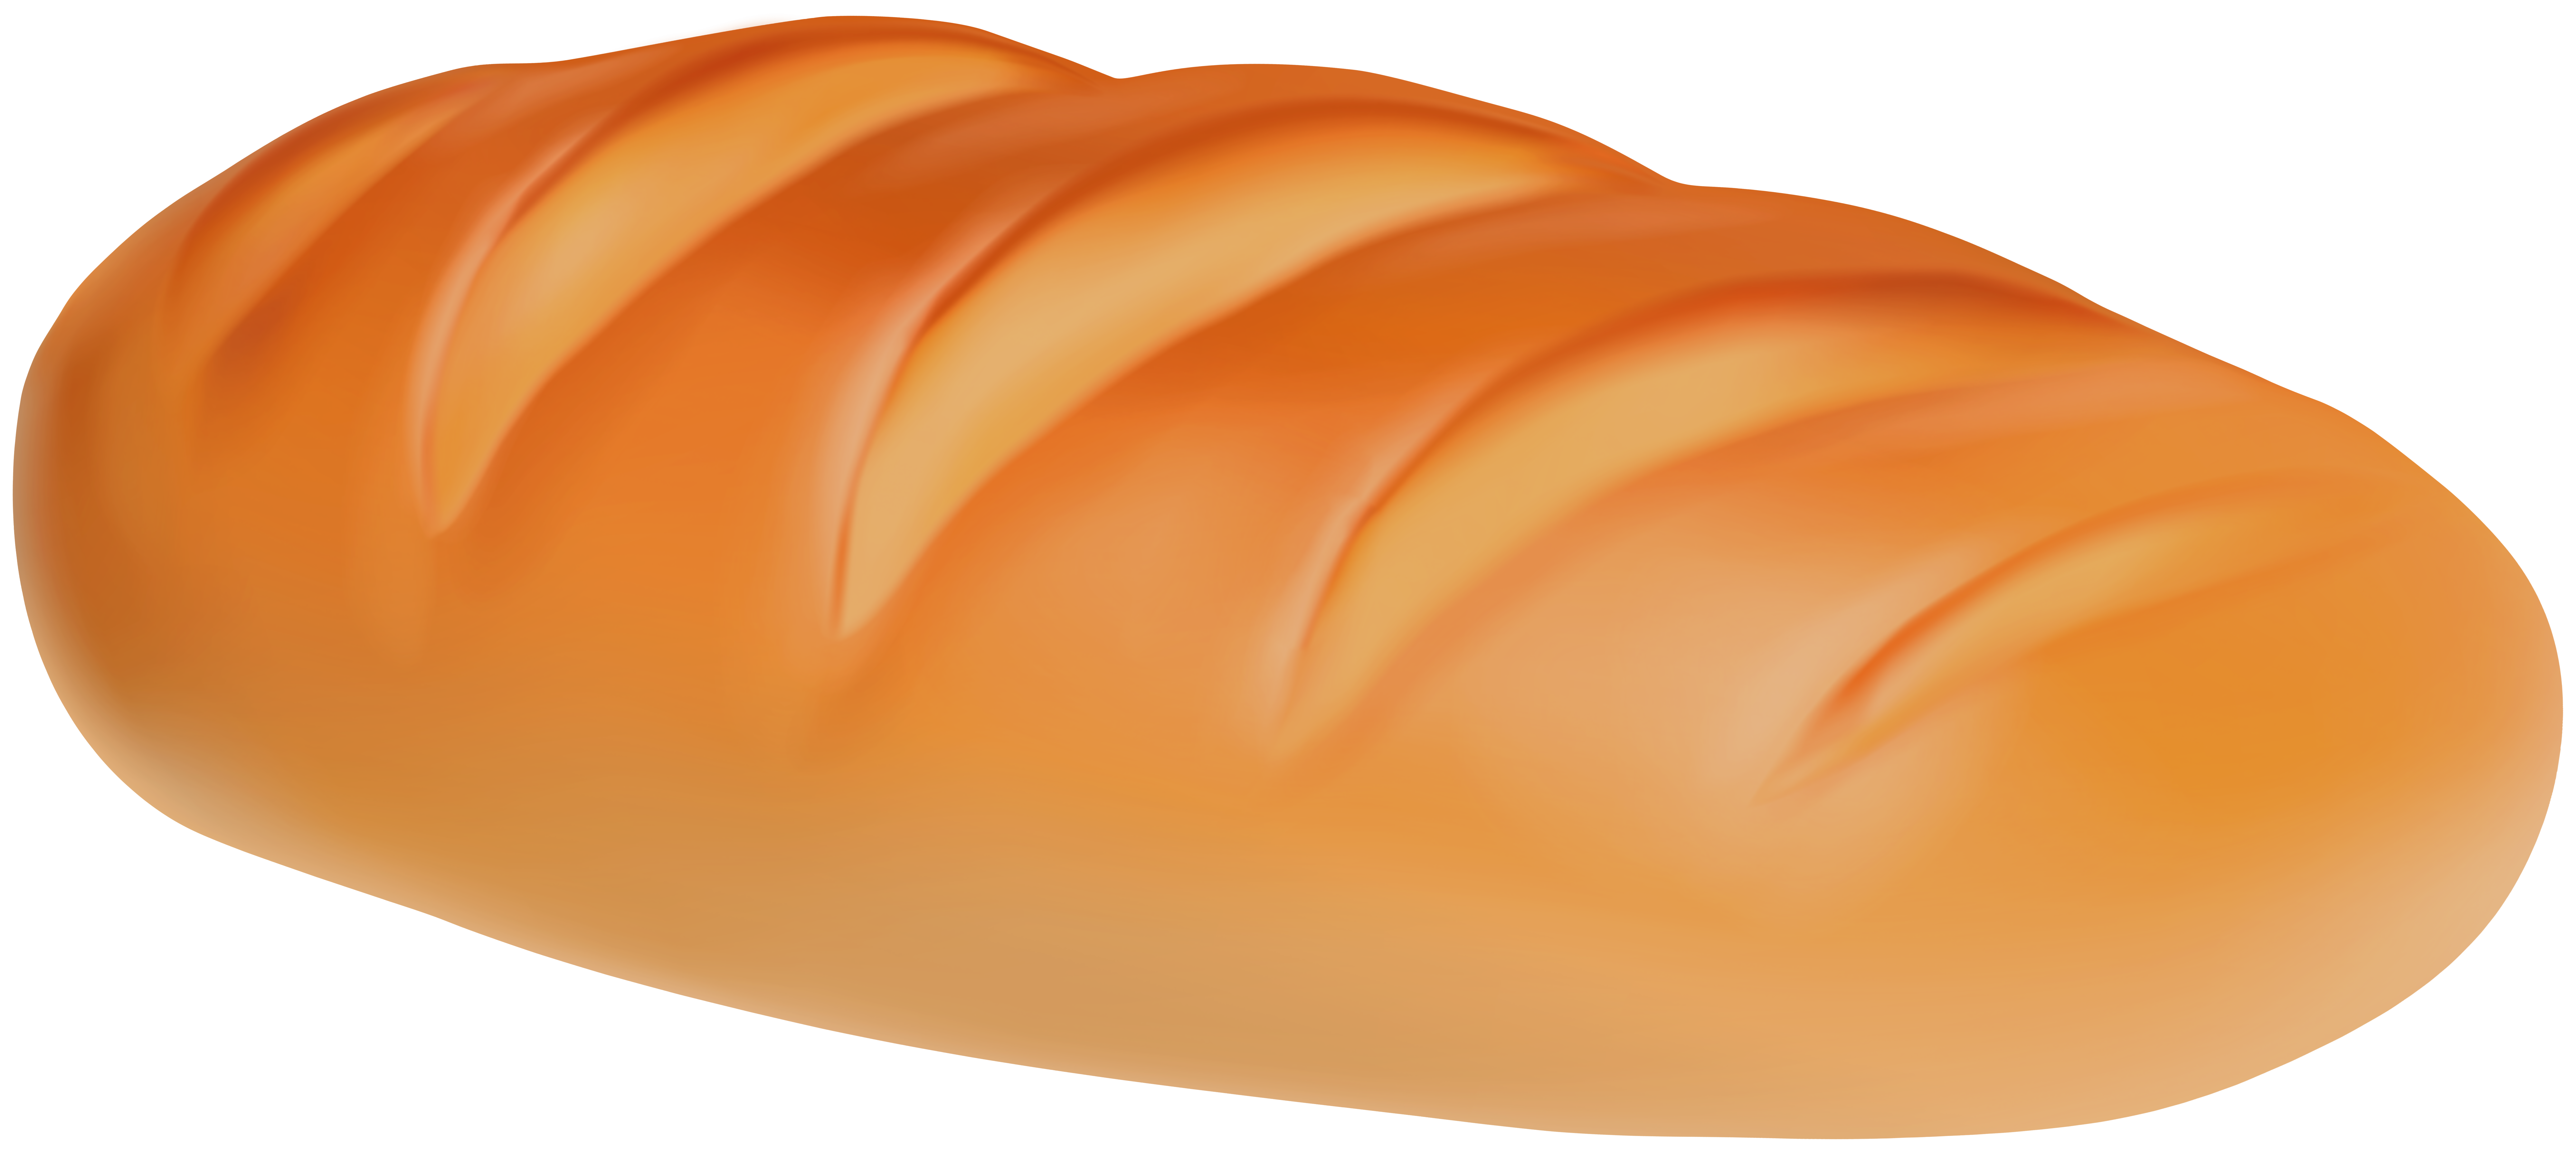 bread clipart high quality